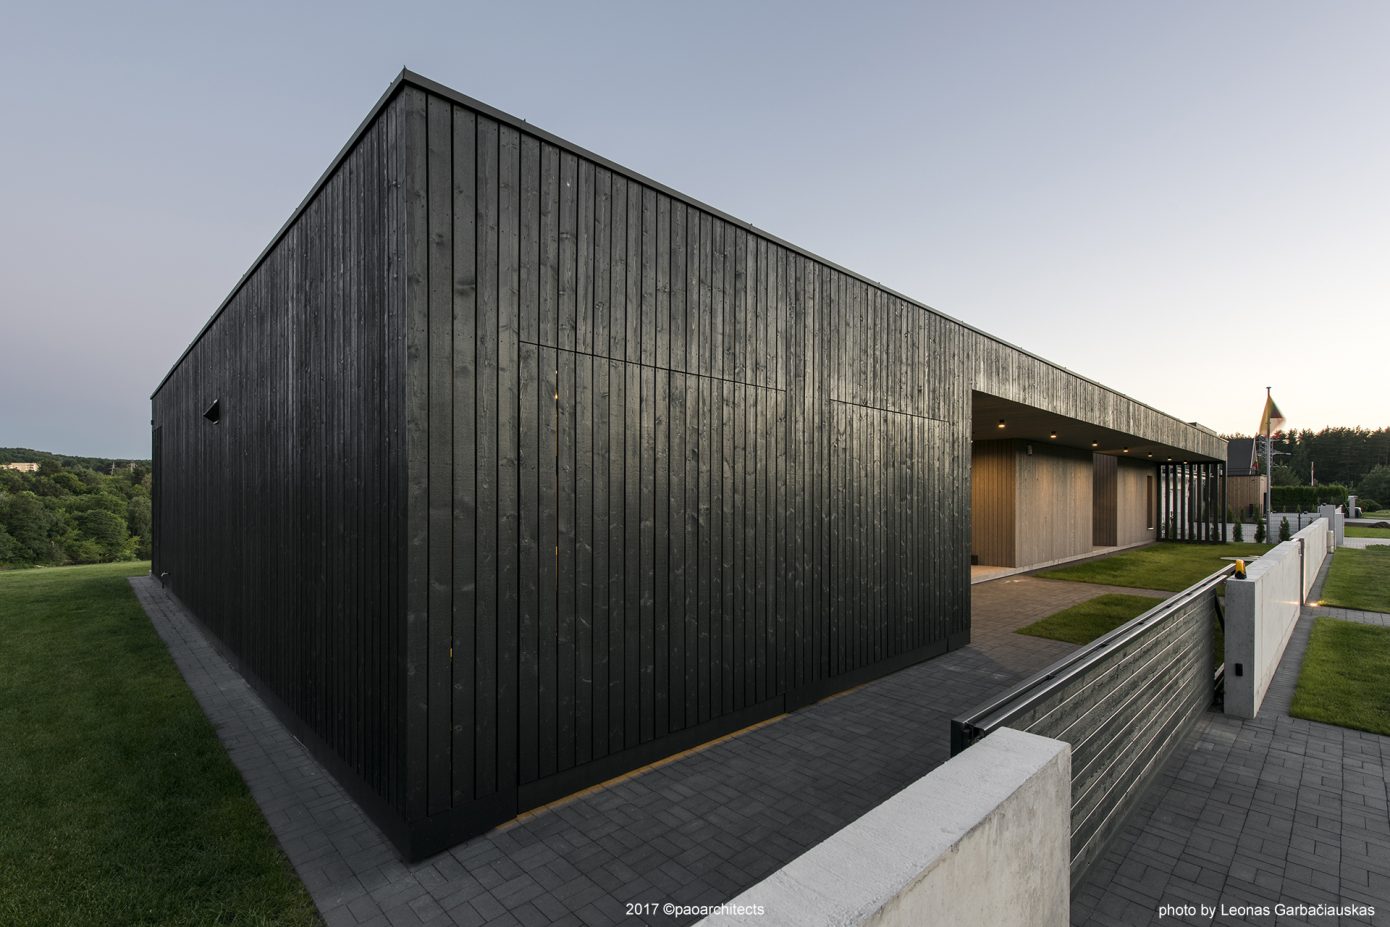 The Black Box House by Pao Architects